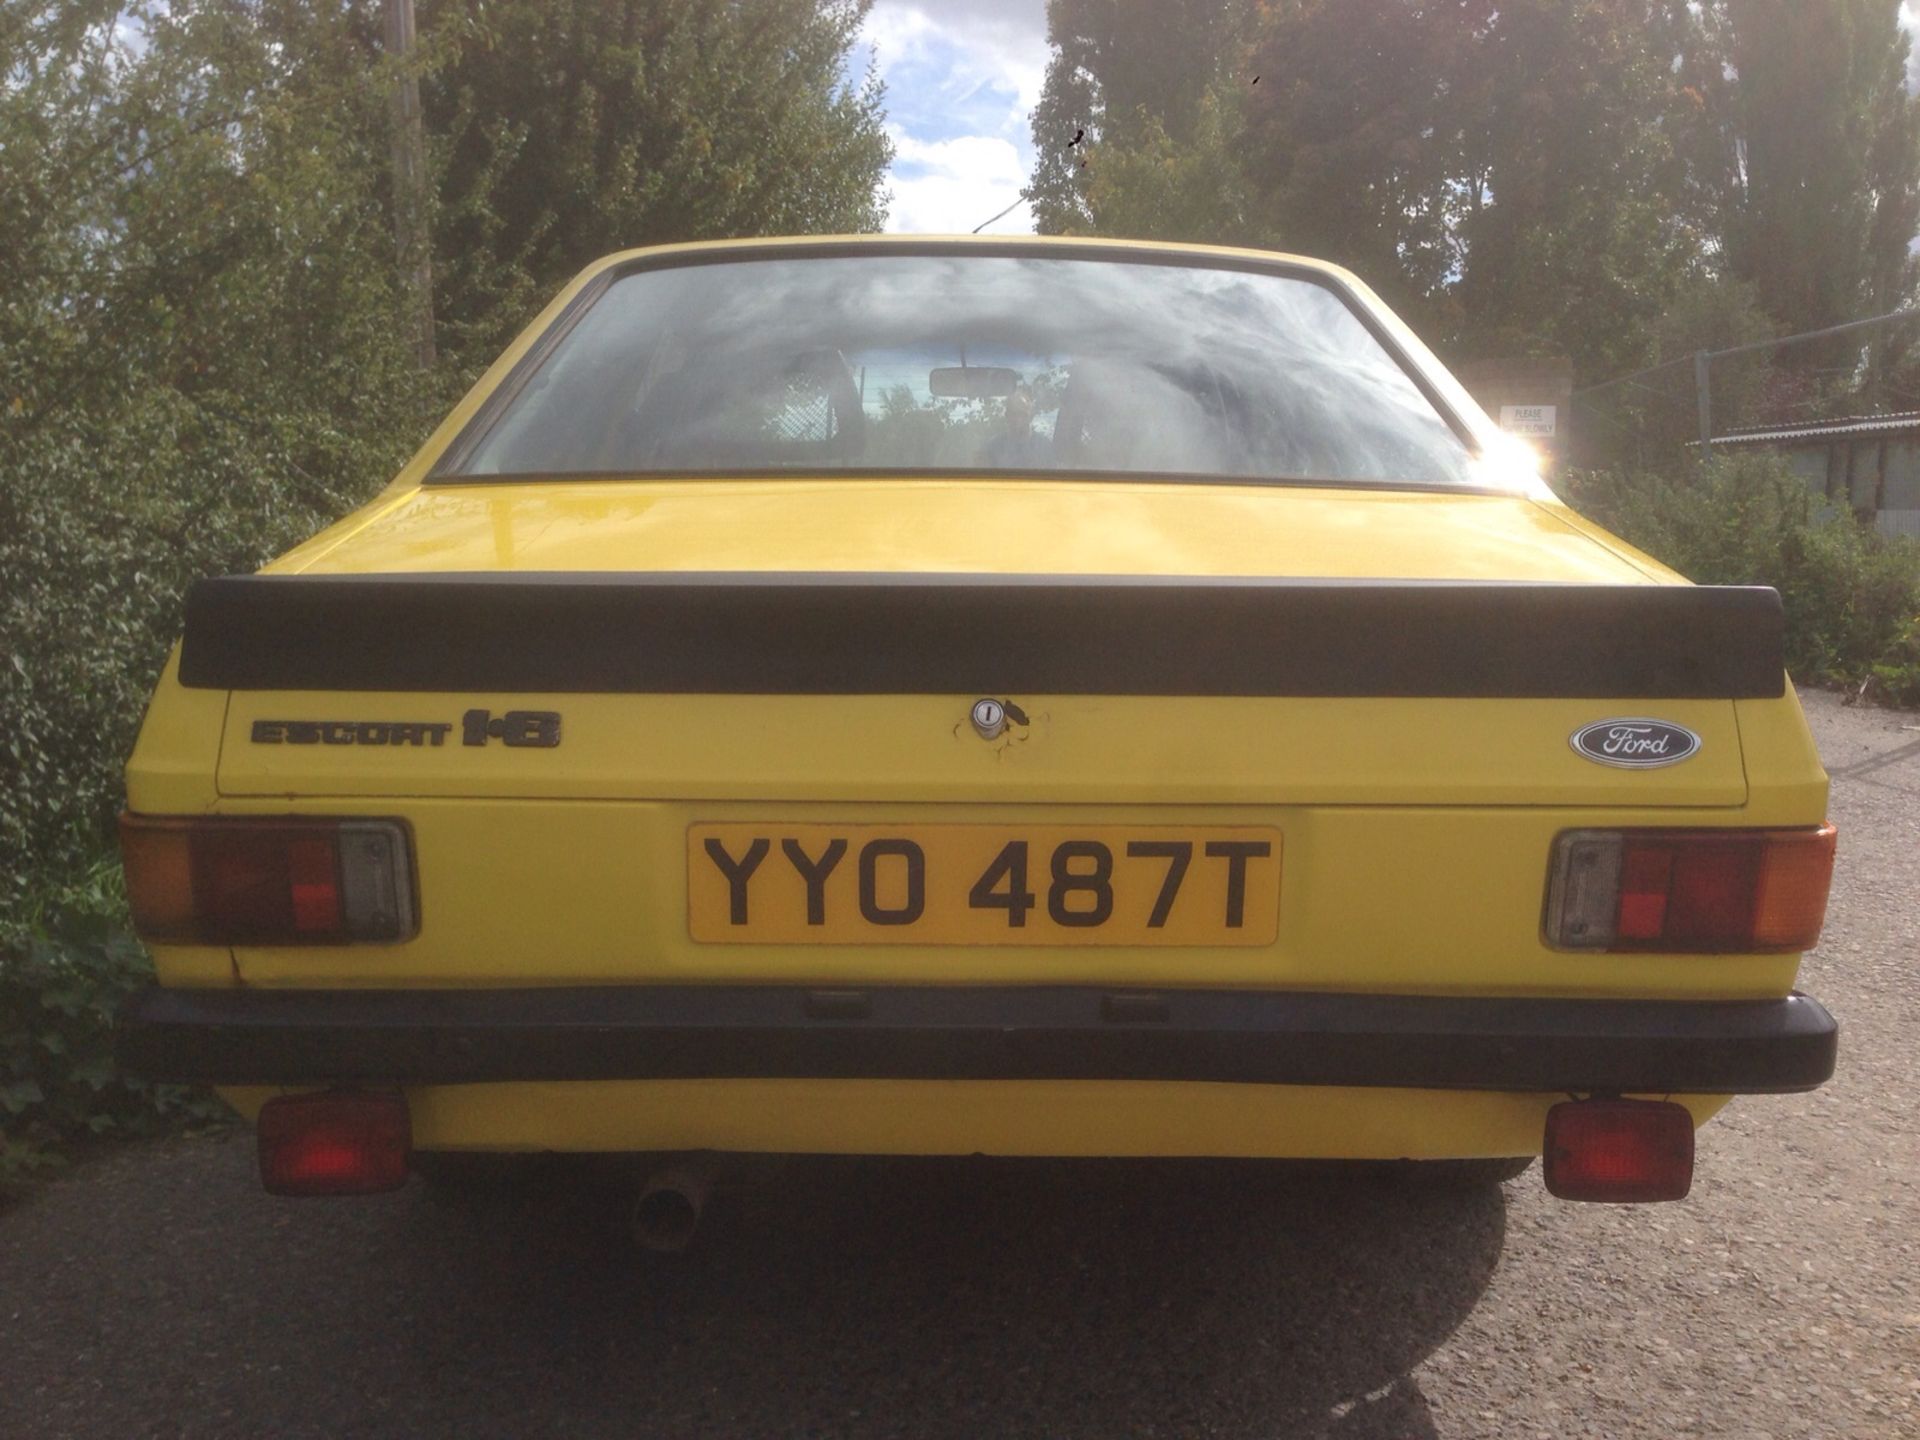 1979/T Ford Escort mk2 1600 Sport - in Signal yellow -  UK car  (545 miles) since rebuild - Image 11 of 54